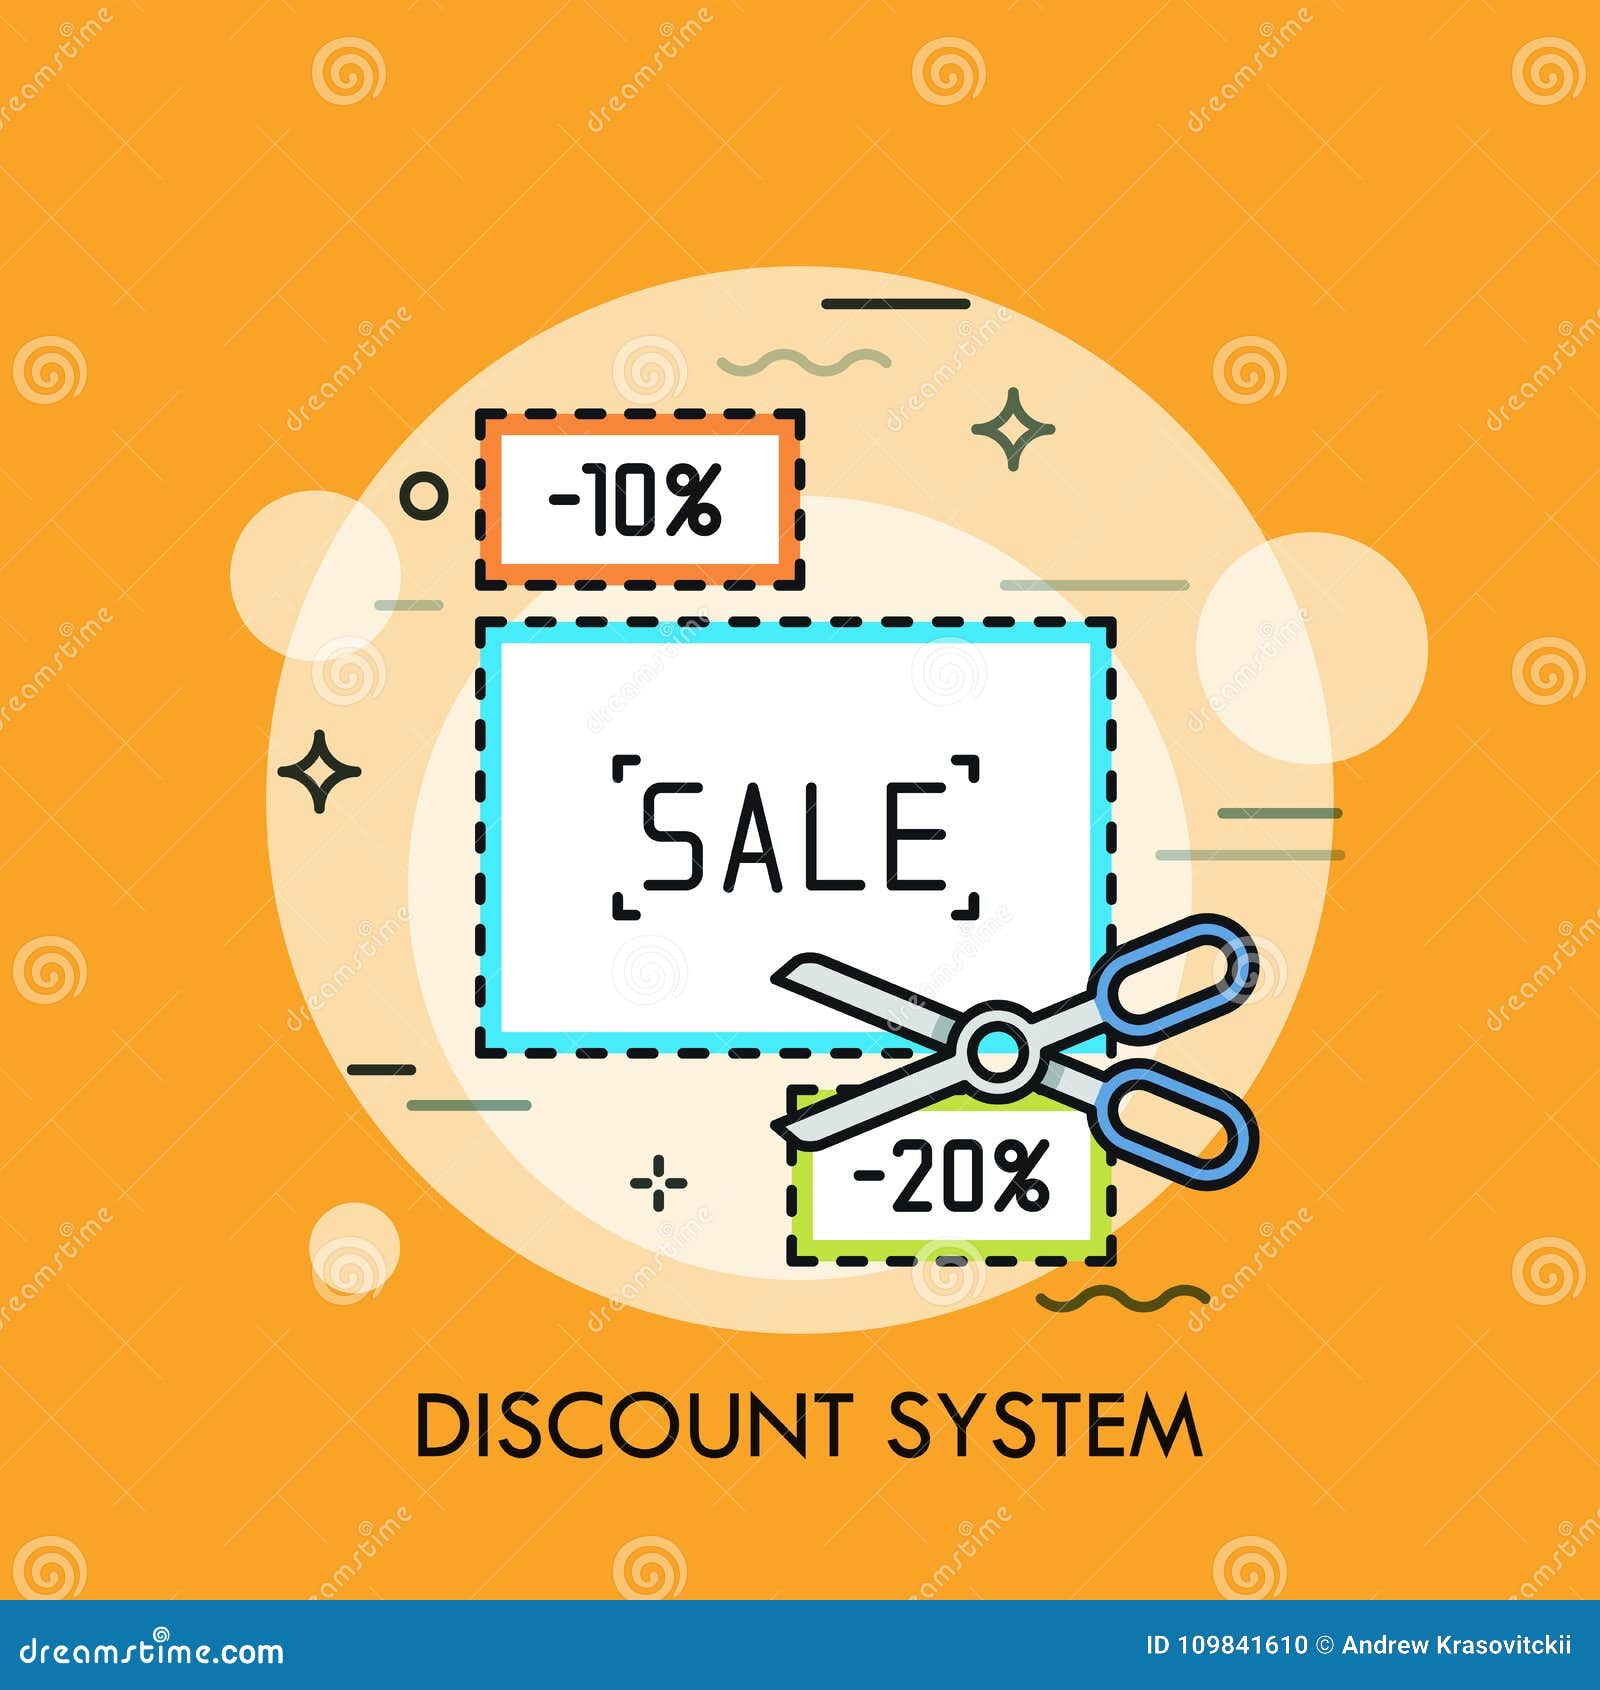 concept-of-shopping-discount-system-sale-promotion-store-rebates